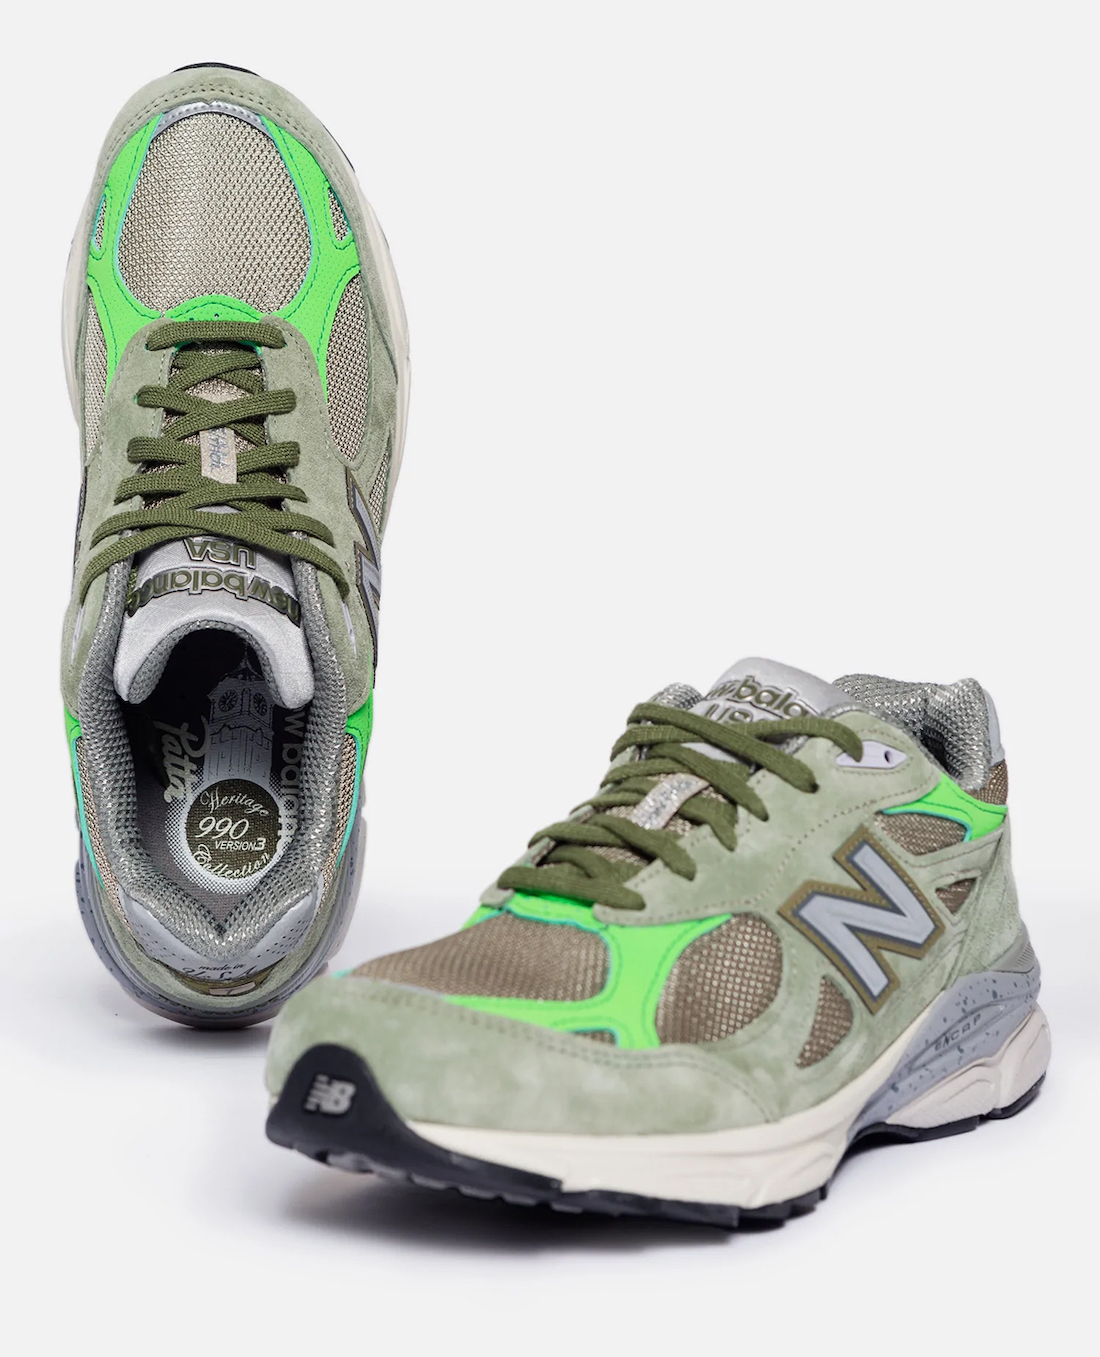 Patta New Balance 990v3 Olive M990PP3 Release Date